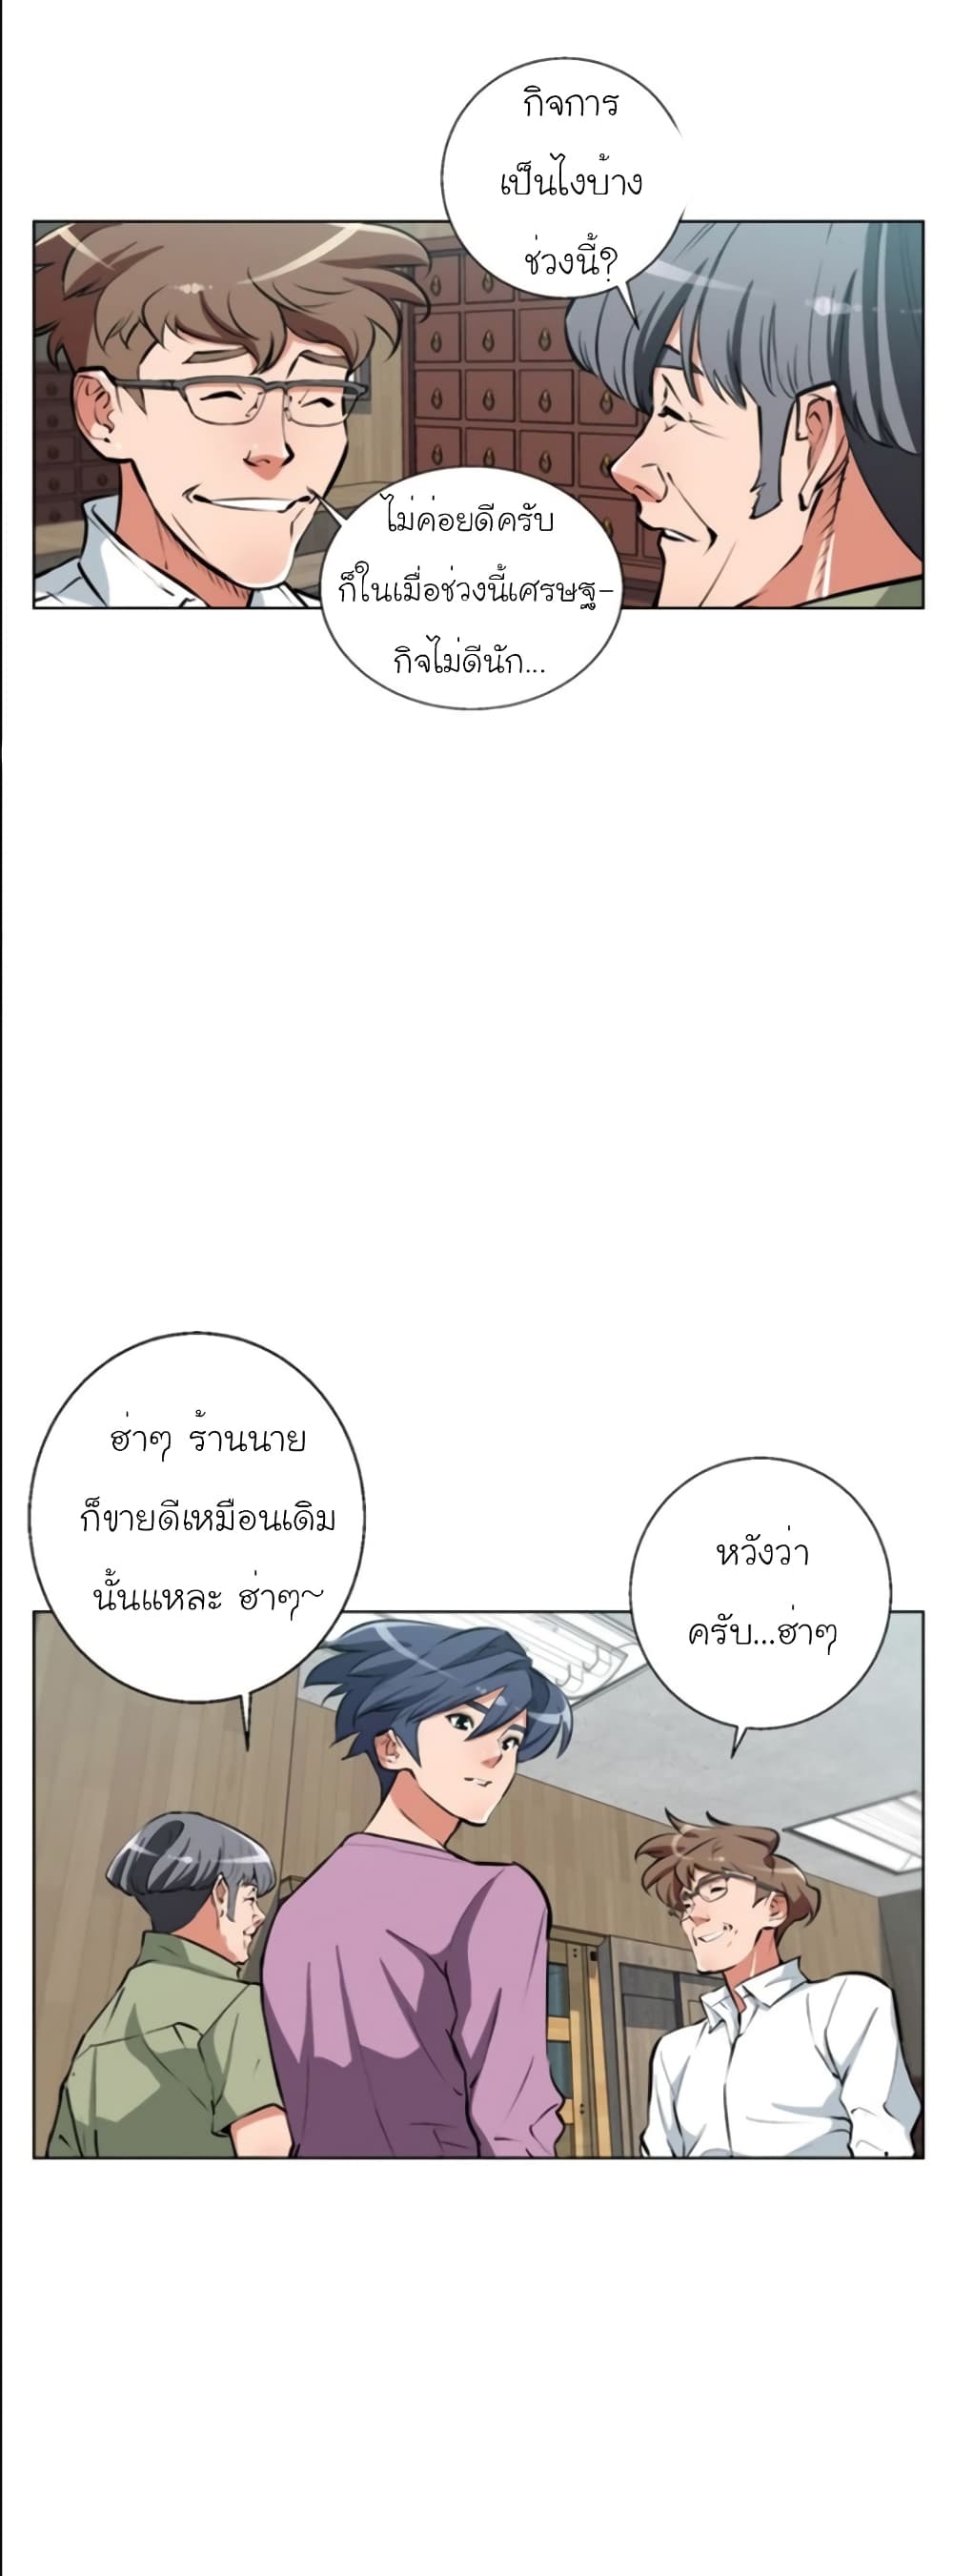 I Stack Experience Through Reading Books ตอนที่ 51 (4)